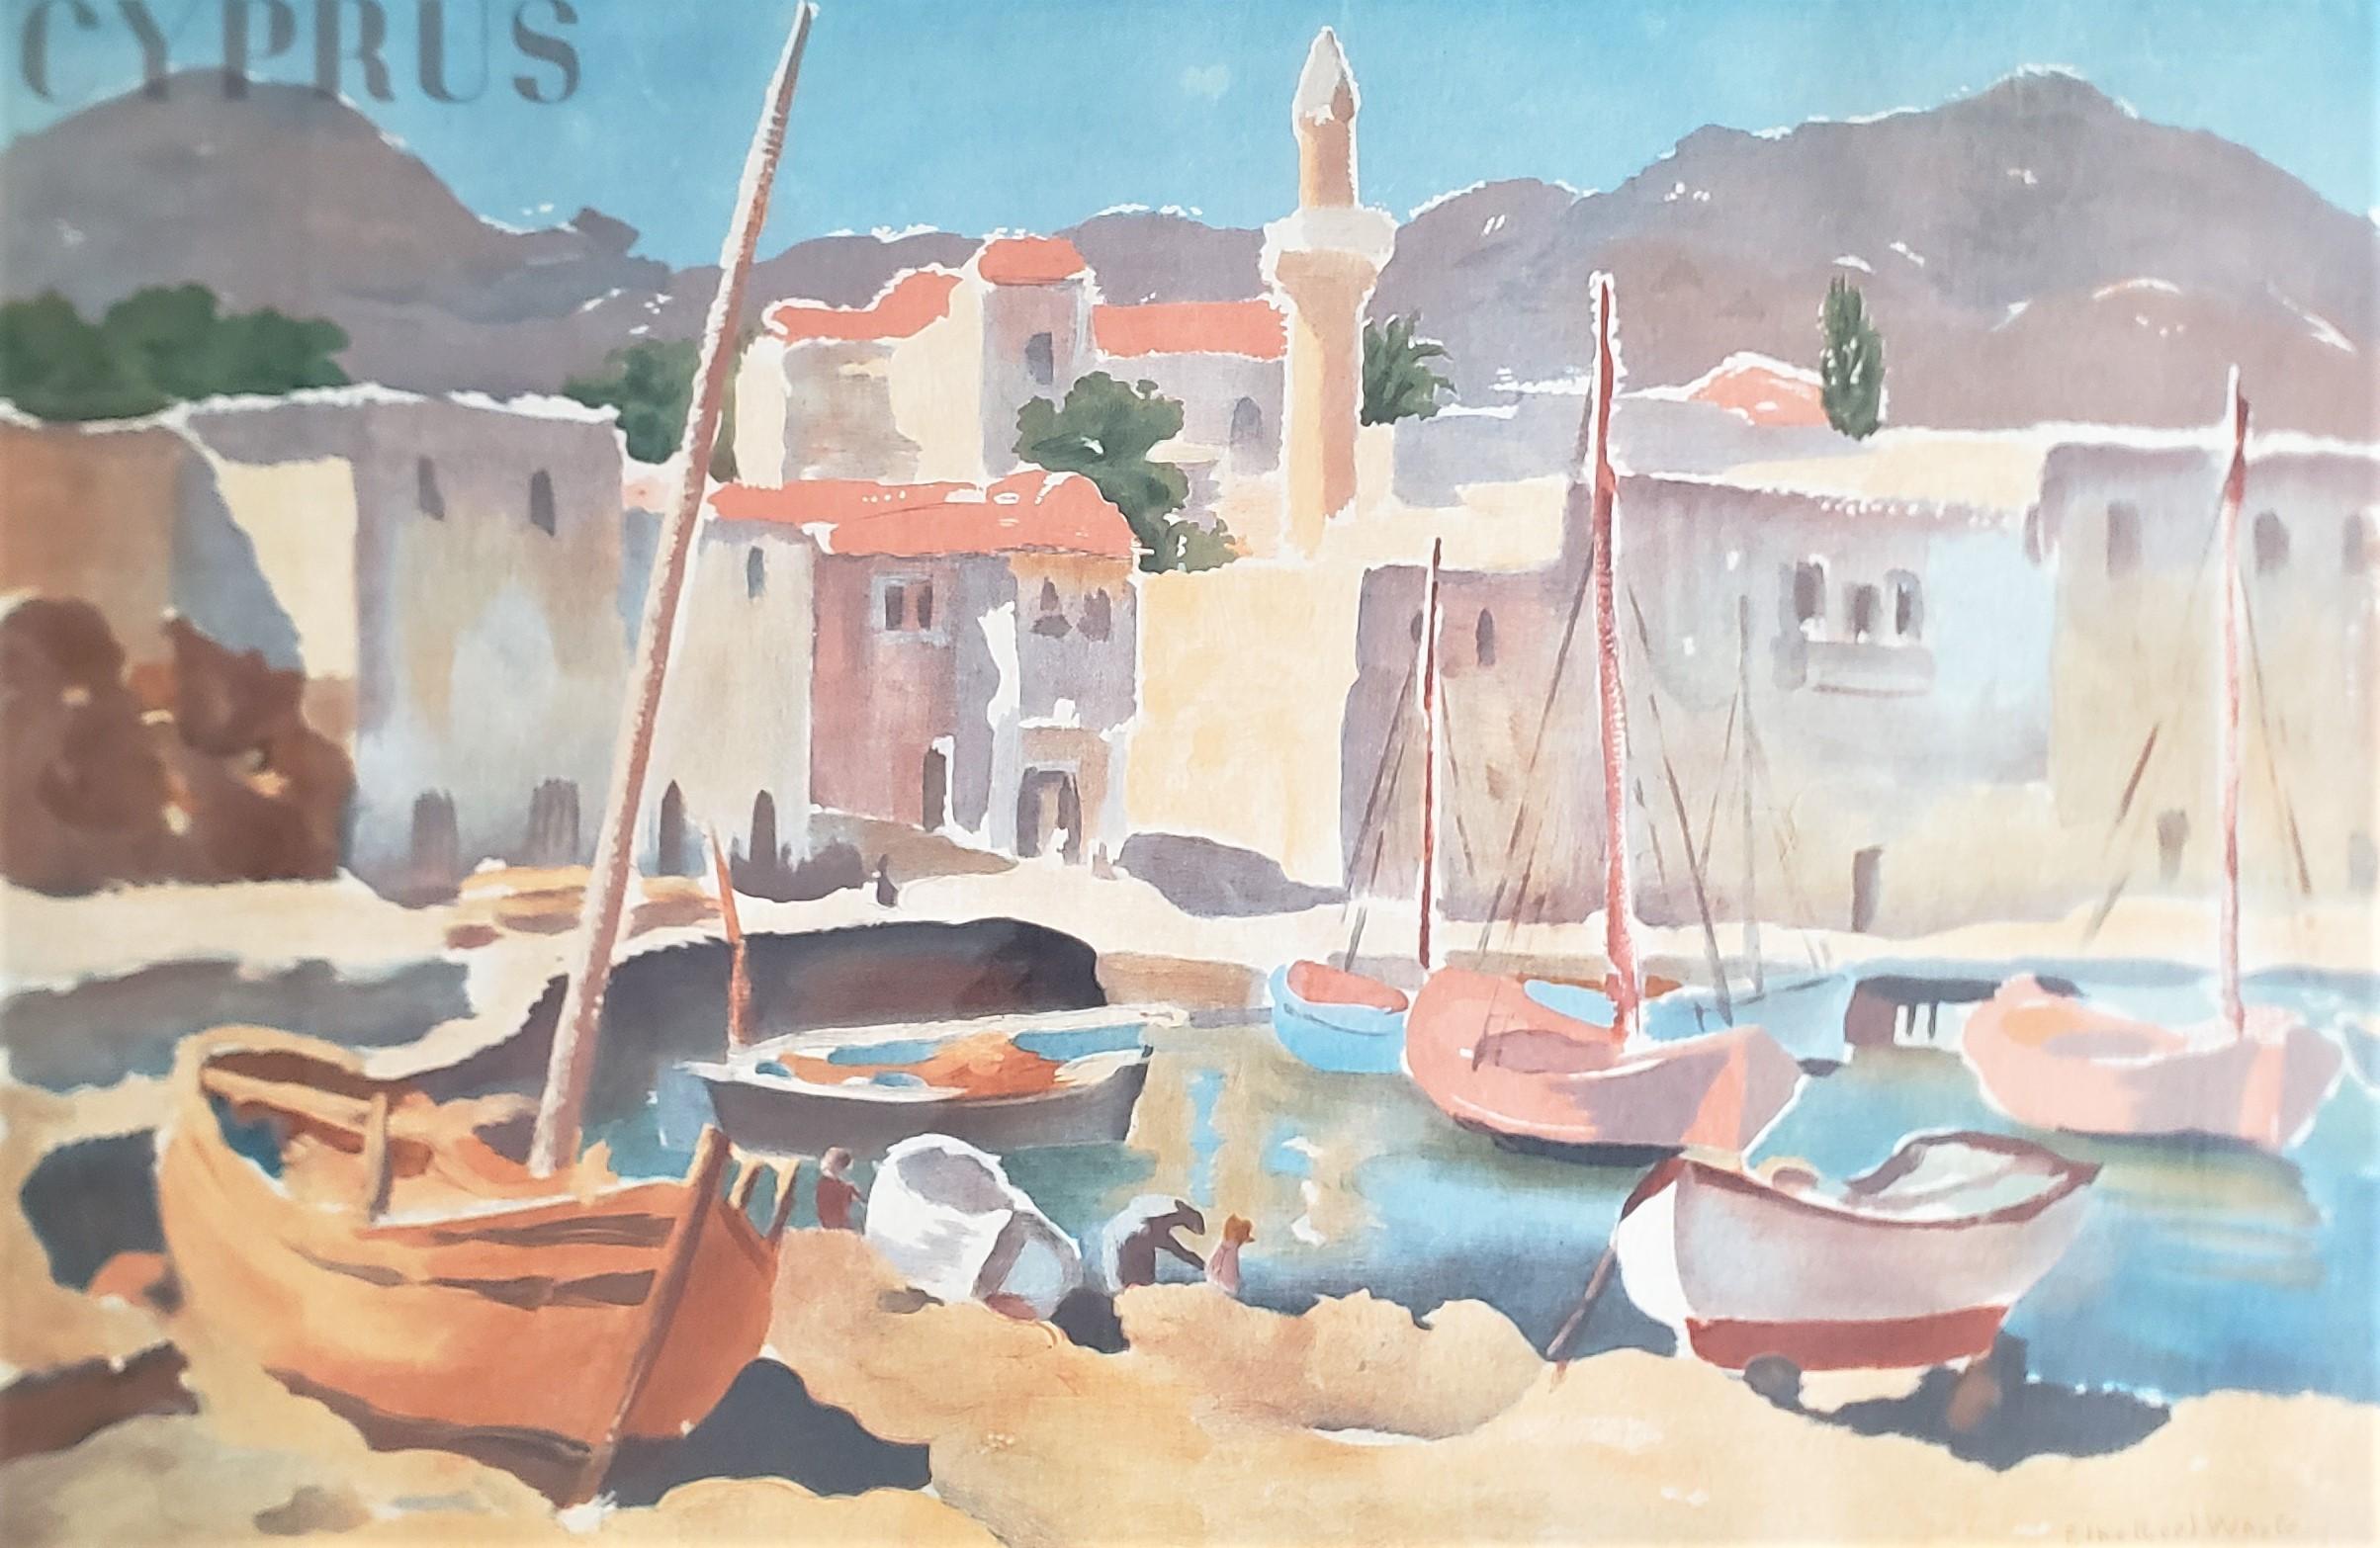 This poster was made by the Baynard Press of London, England in approximately 1920 and issued by the Government of Cyprus to promote travel to Cyprus in the period Art Deco style. The poster depicts an impressionistic styled landscape with 